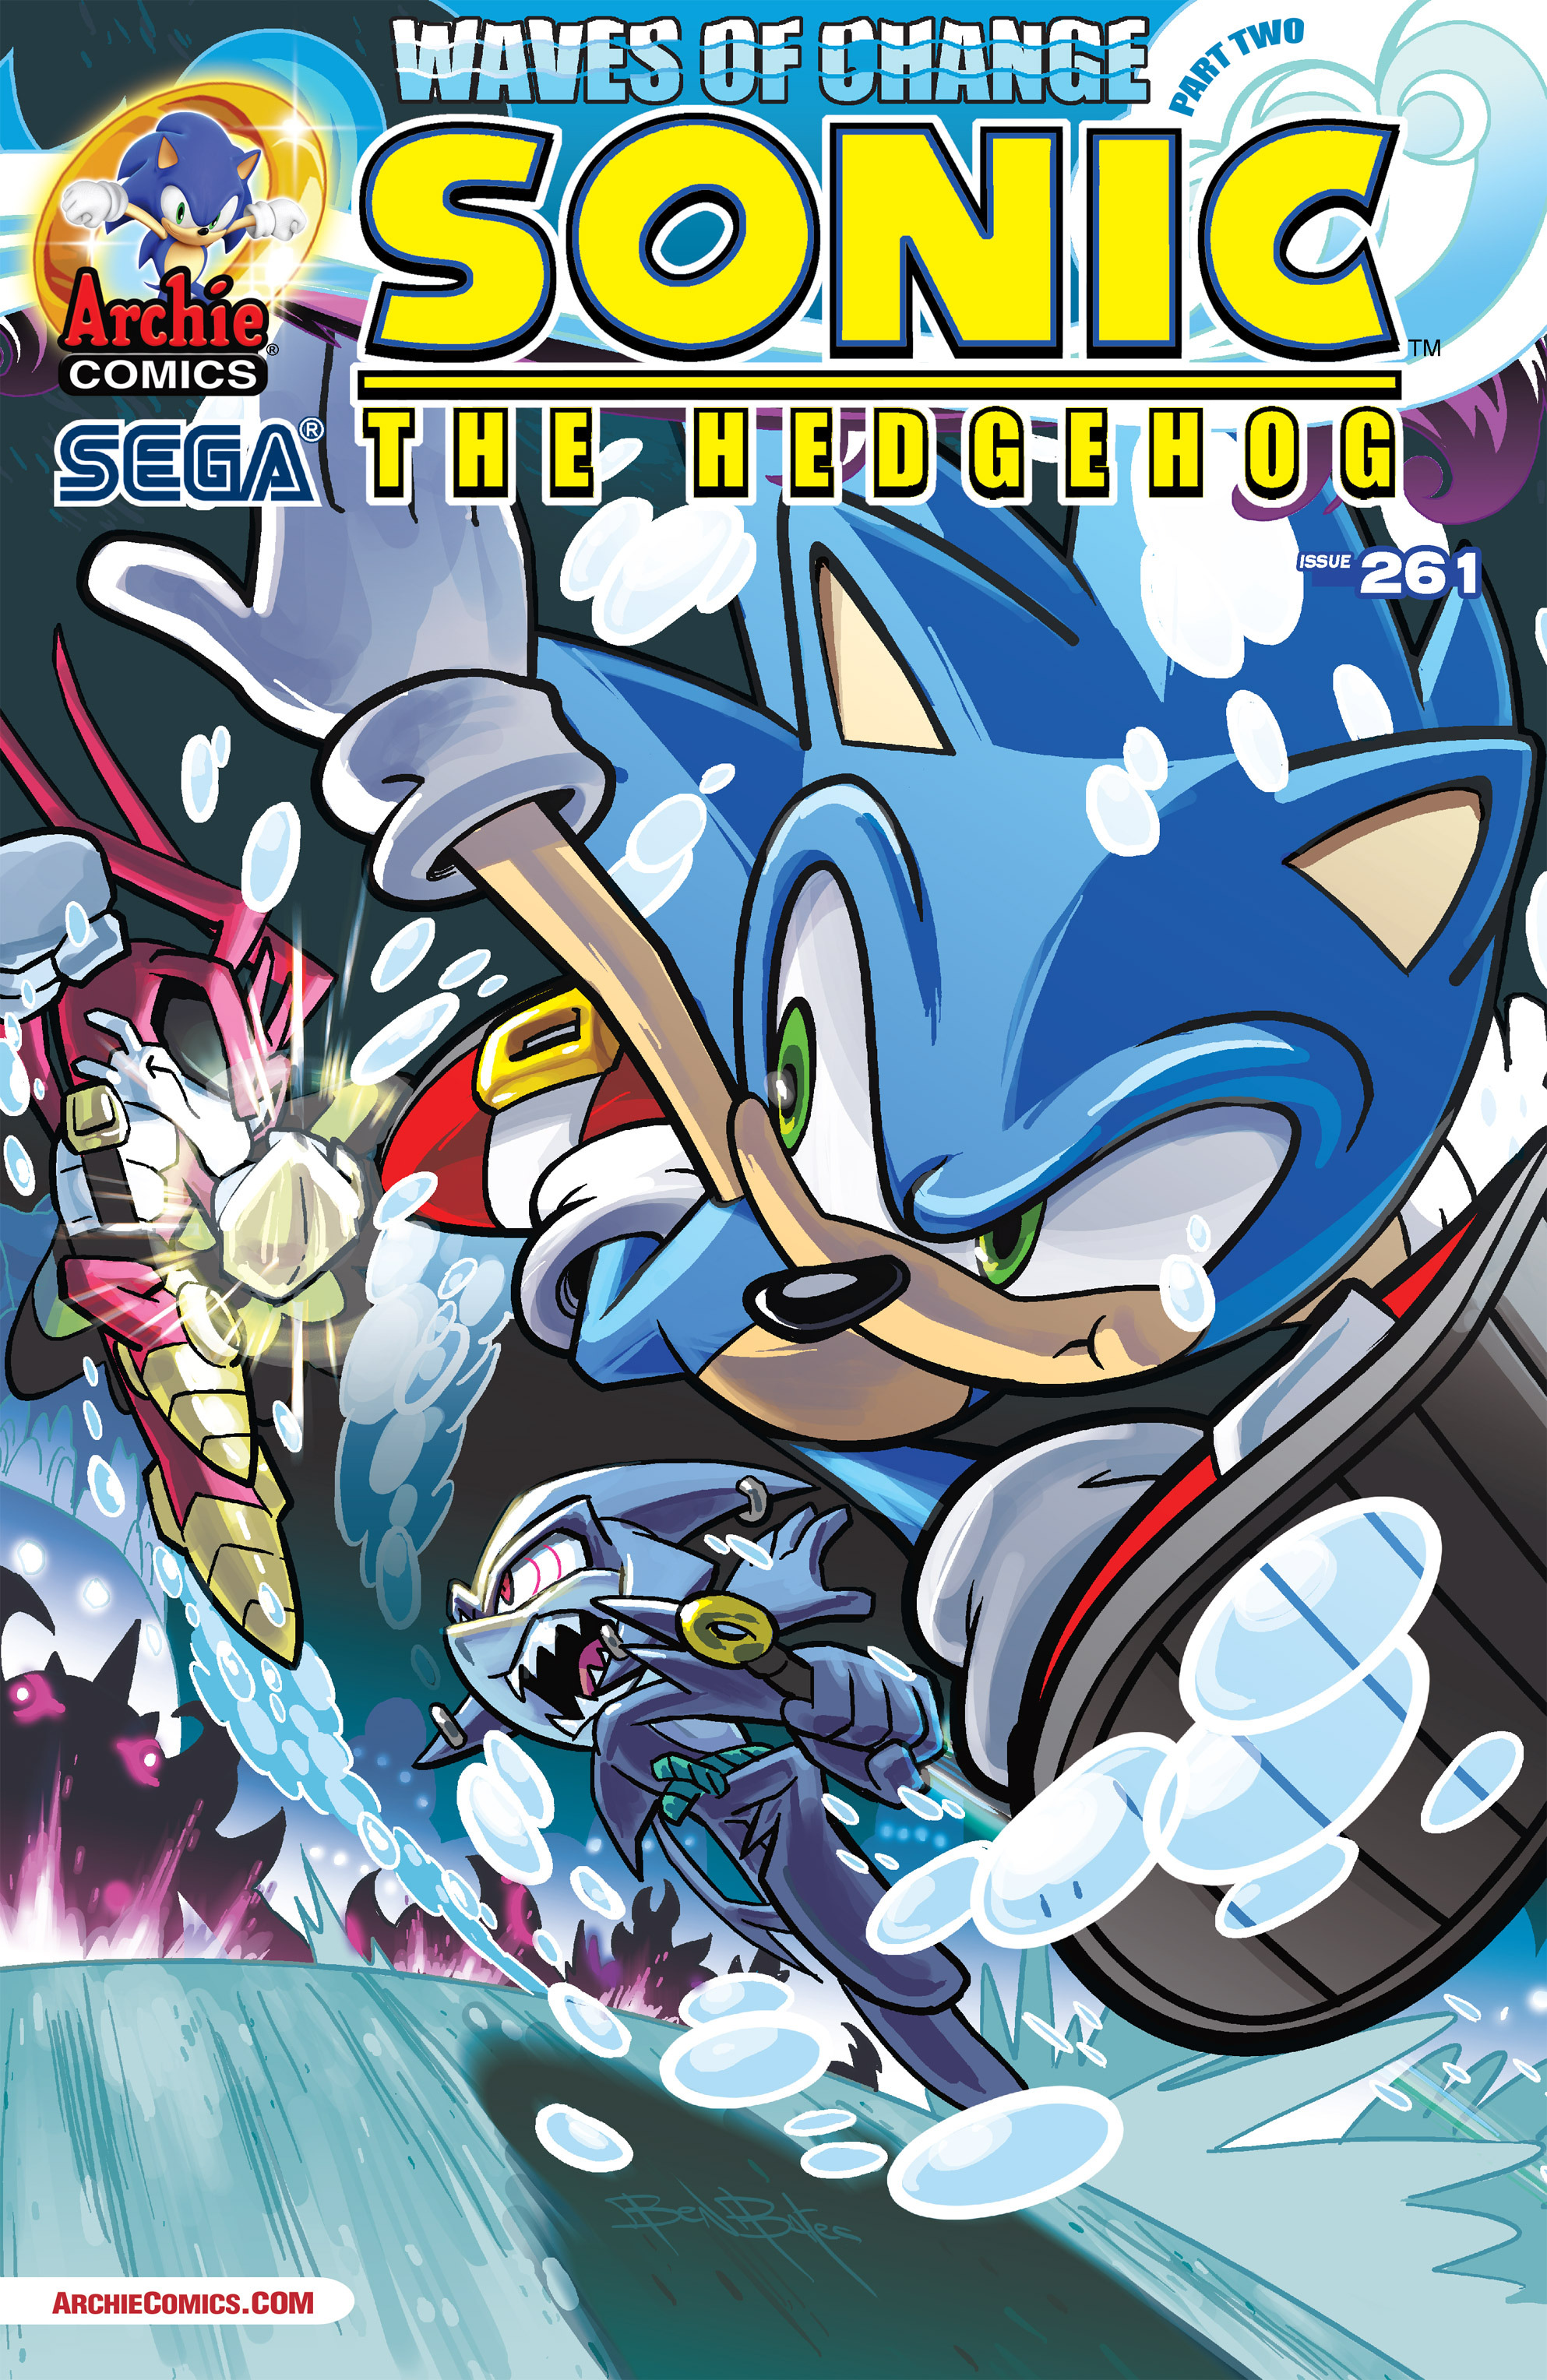 Archie Sonic the Hedgehog Issue 261 | Sonic News Network | FANDOM powered by Wikia1986 x 3056